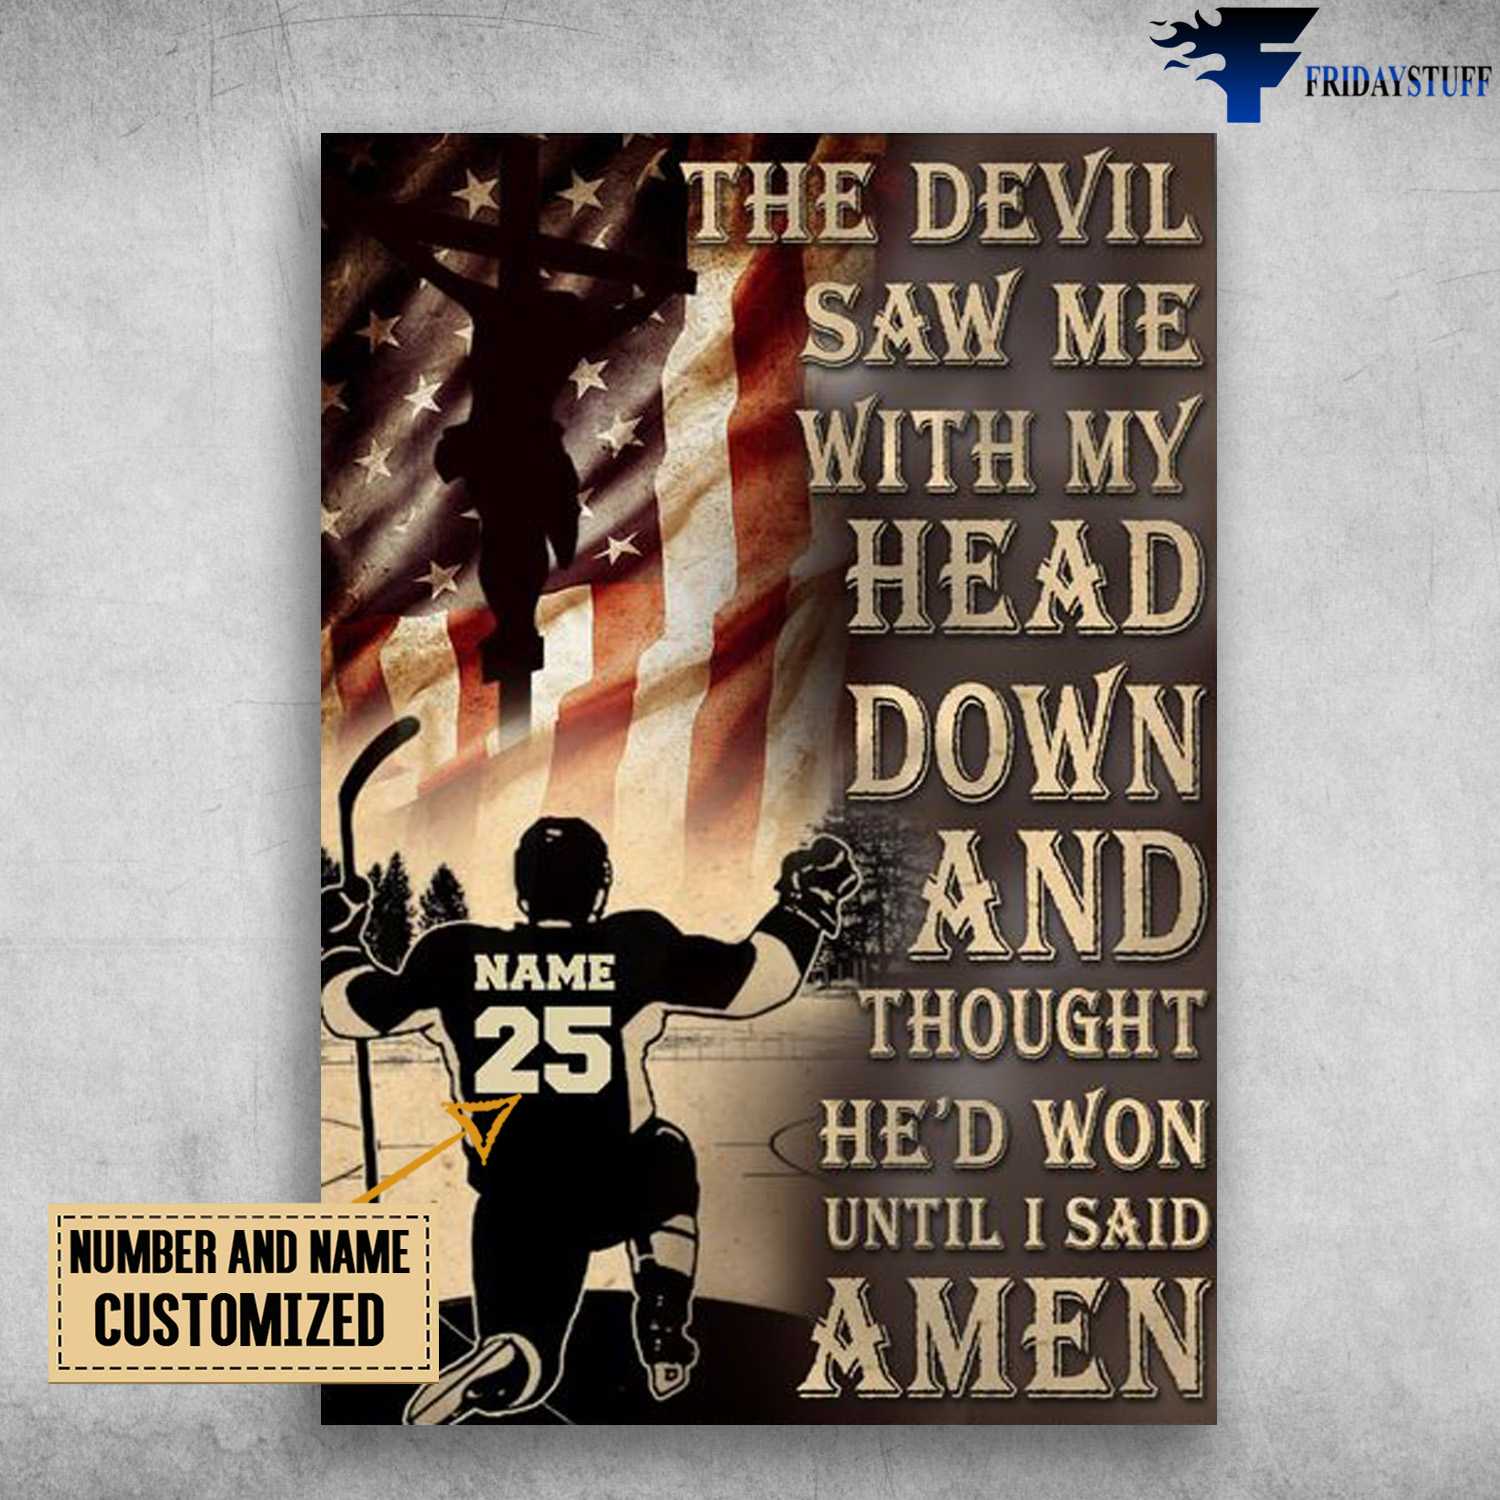 Hockey Player, Jesus Poster, The Devil Saw Me, With My Head Down And Thought, He'd Won Until I Said Amen